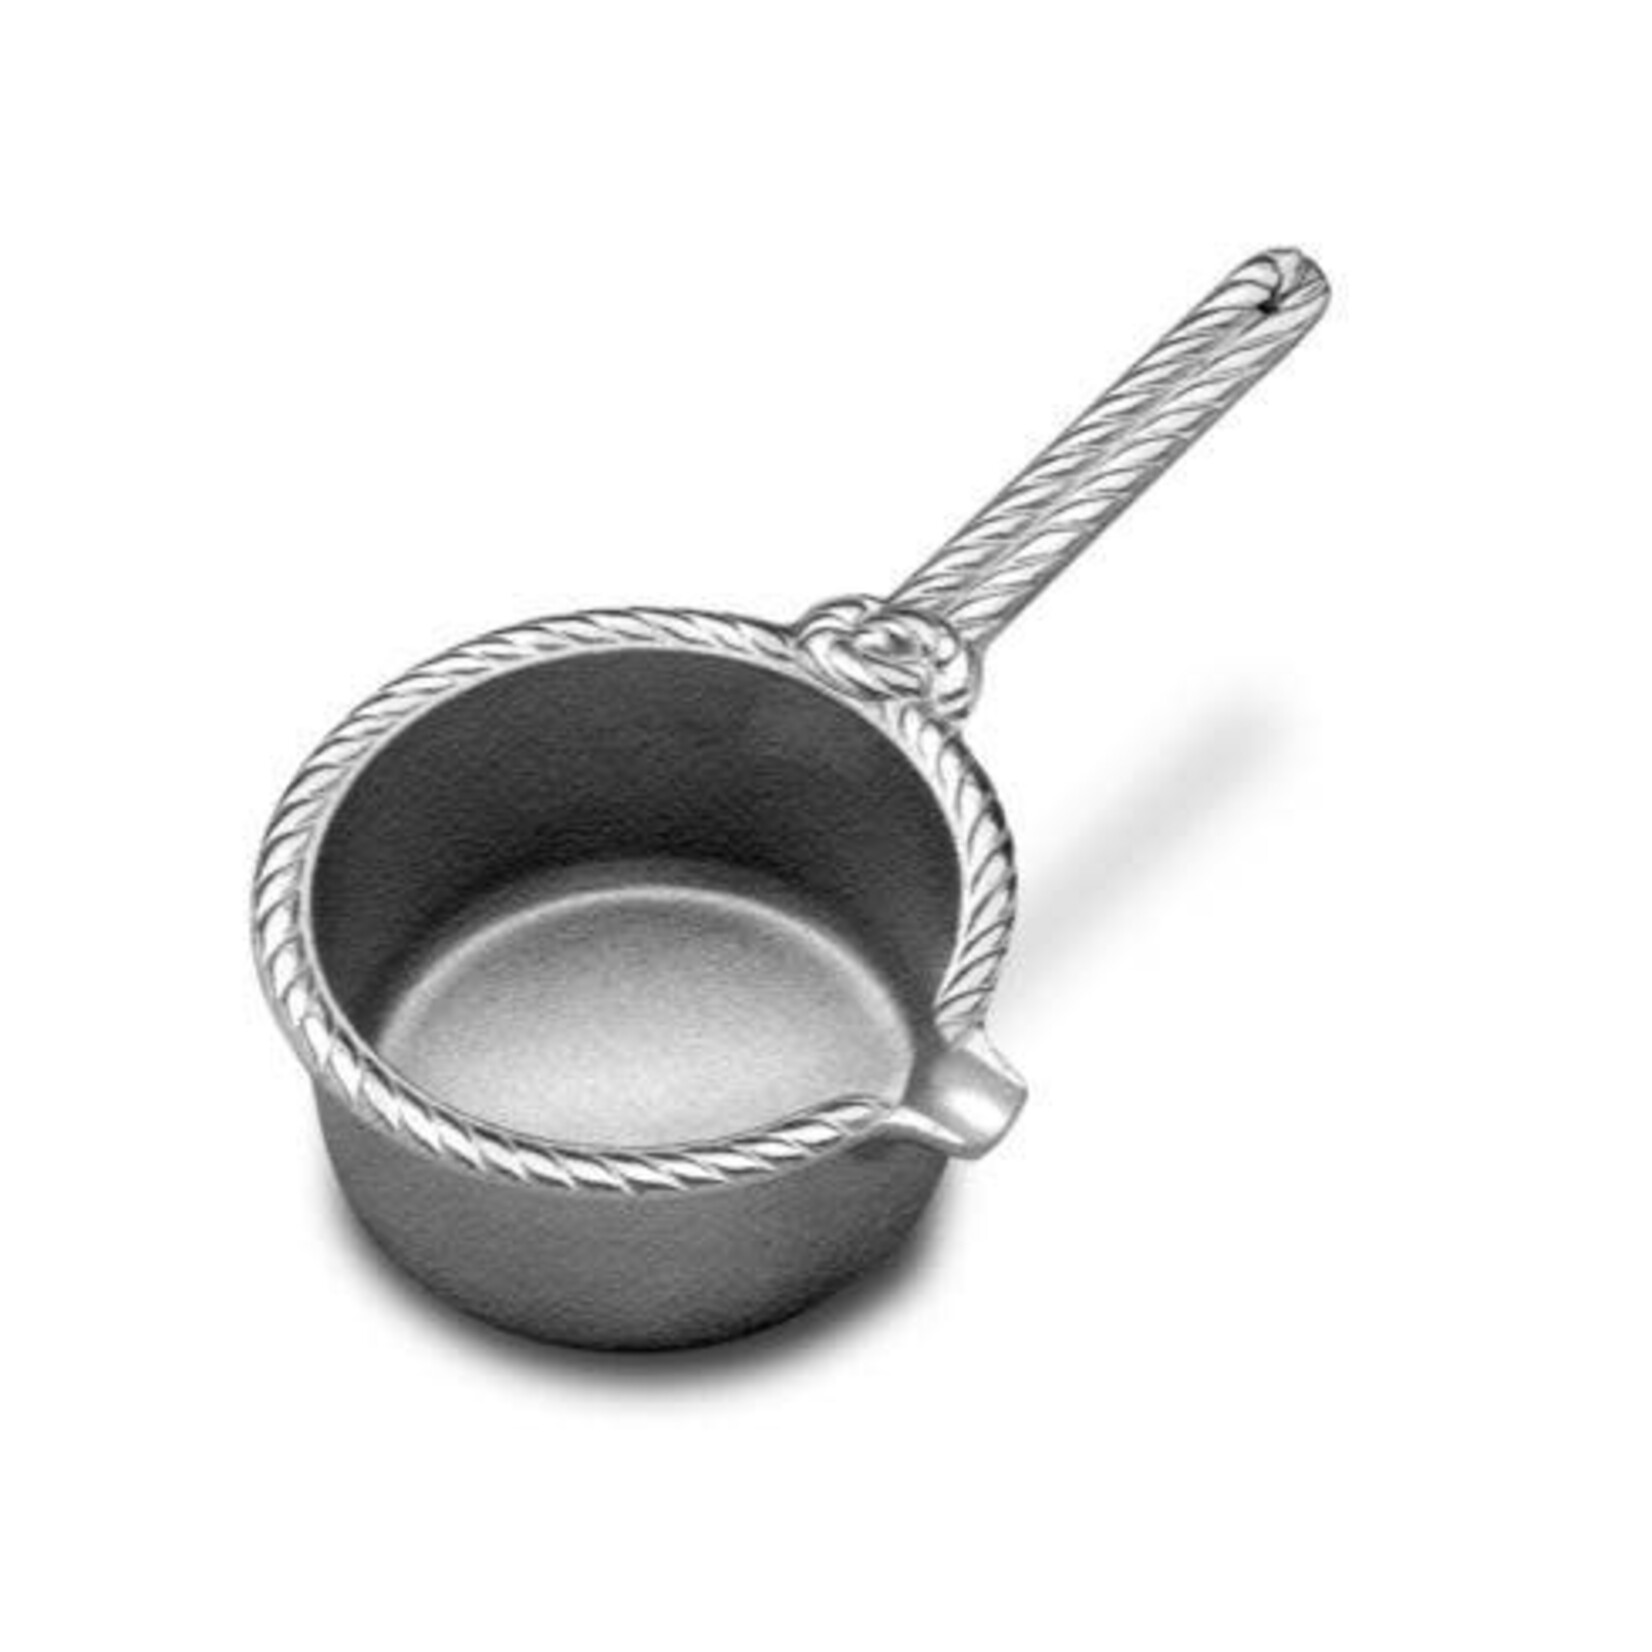 Grillware Saucepot with Spout